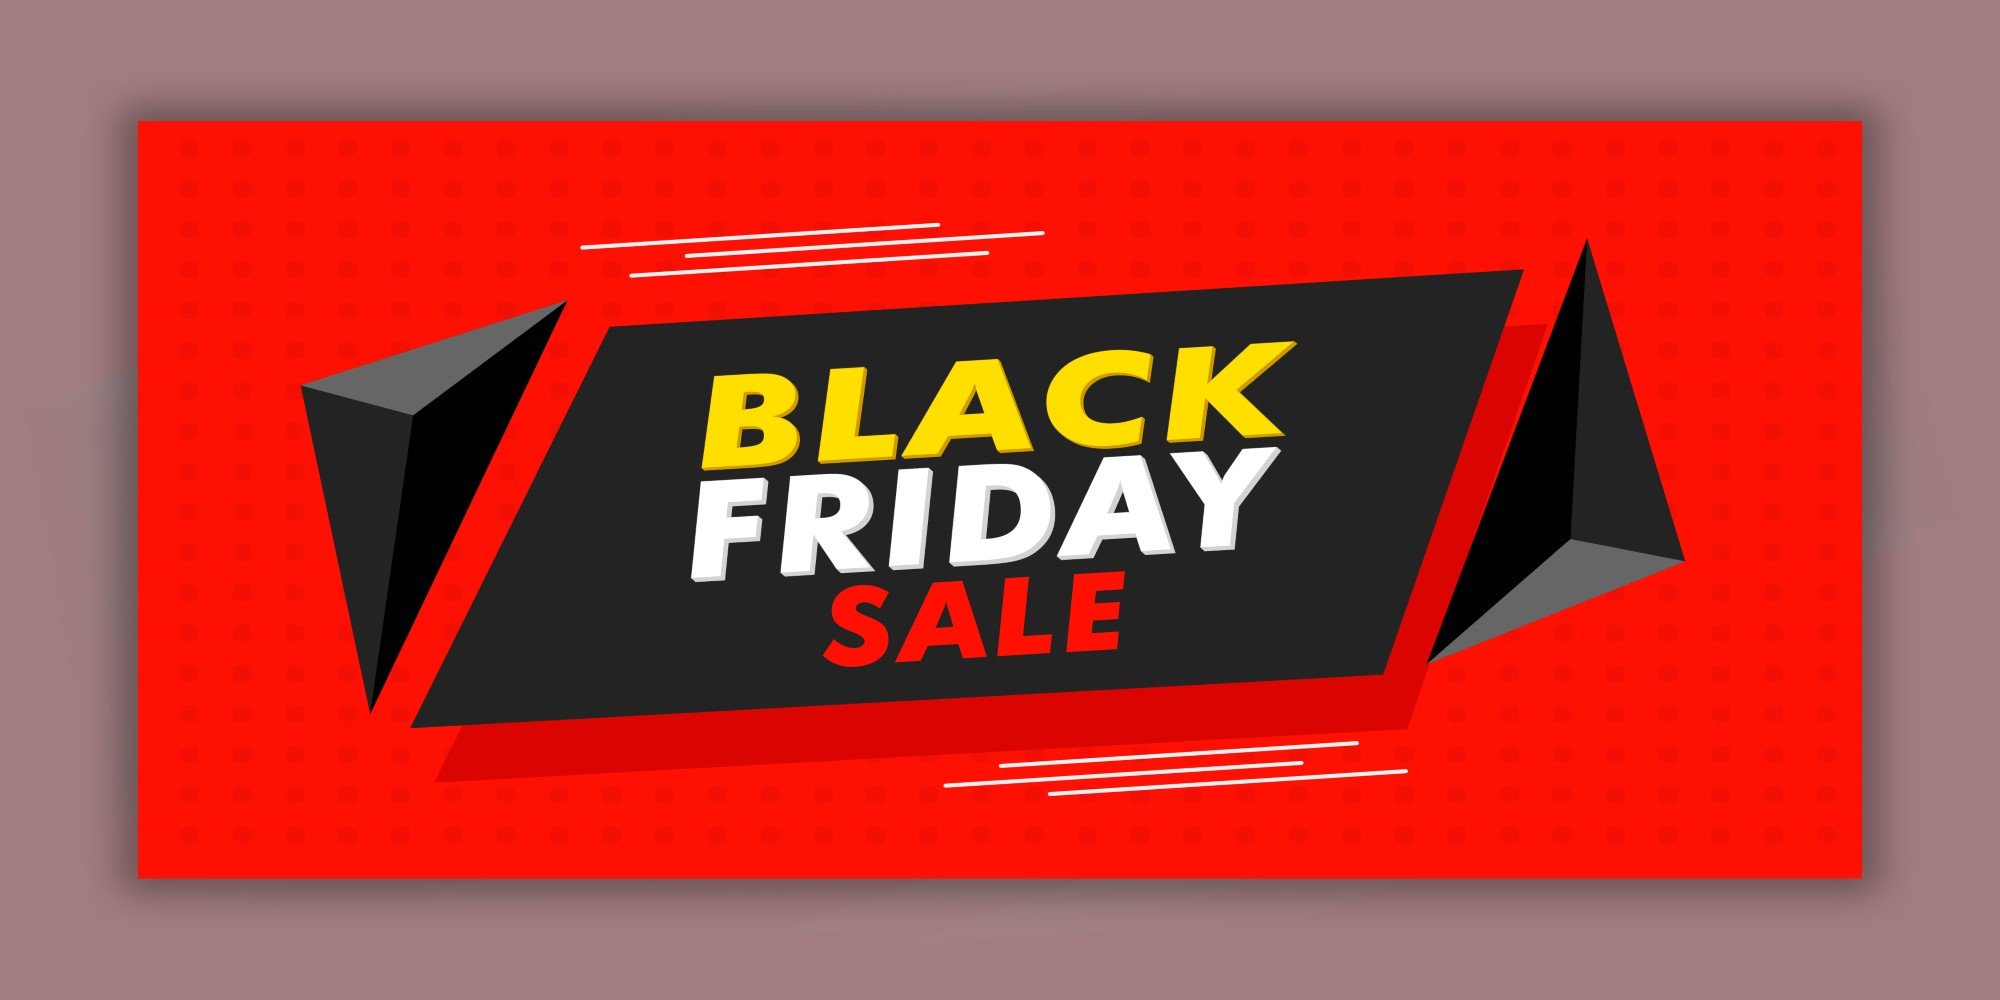 Red Black Friday banner with black section for description.